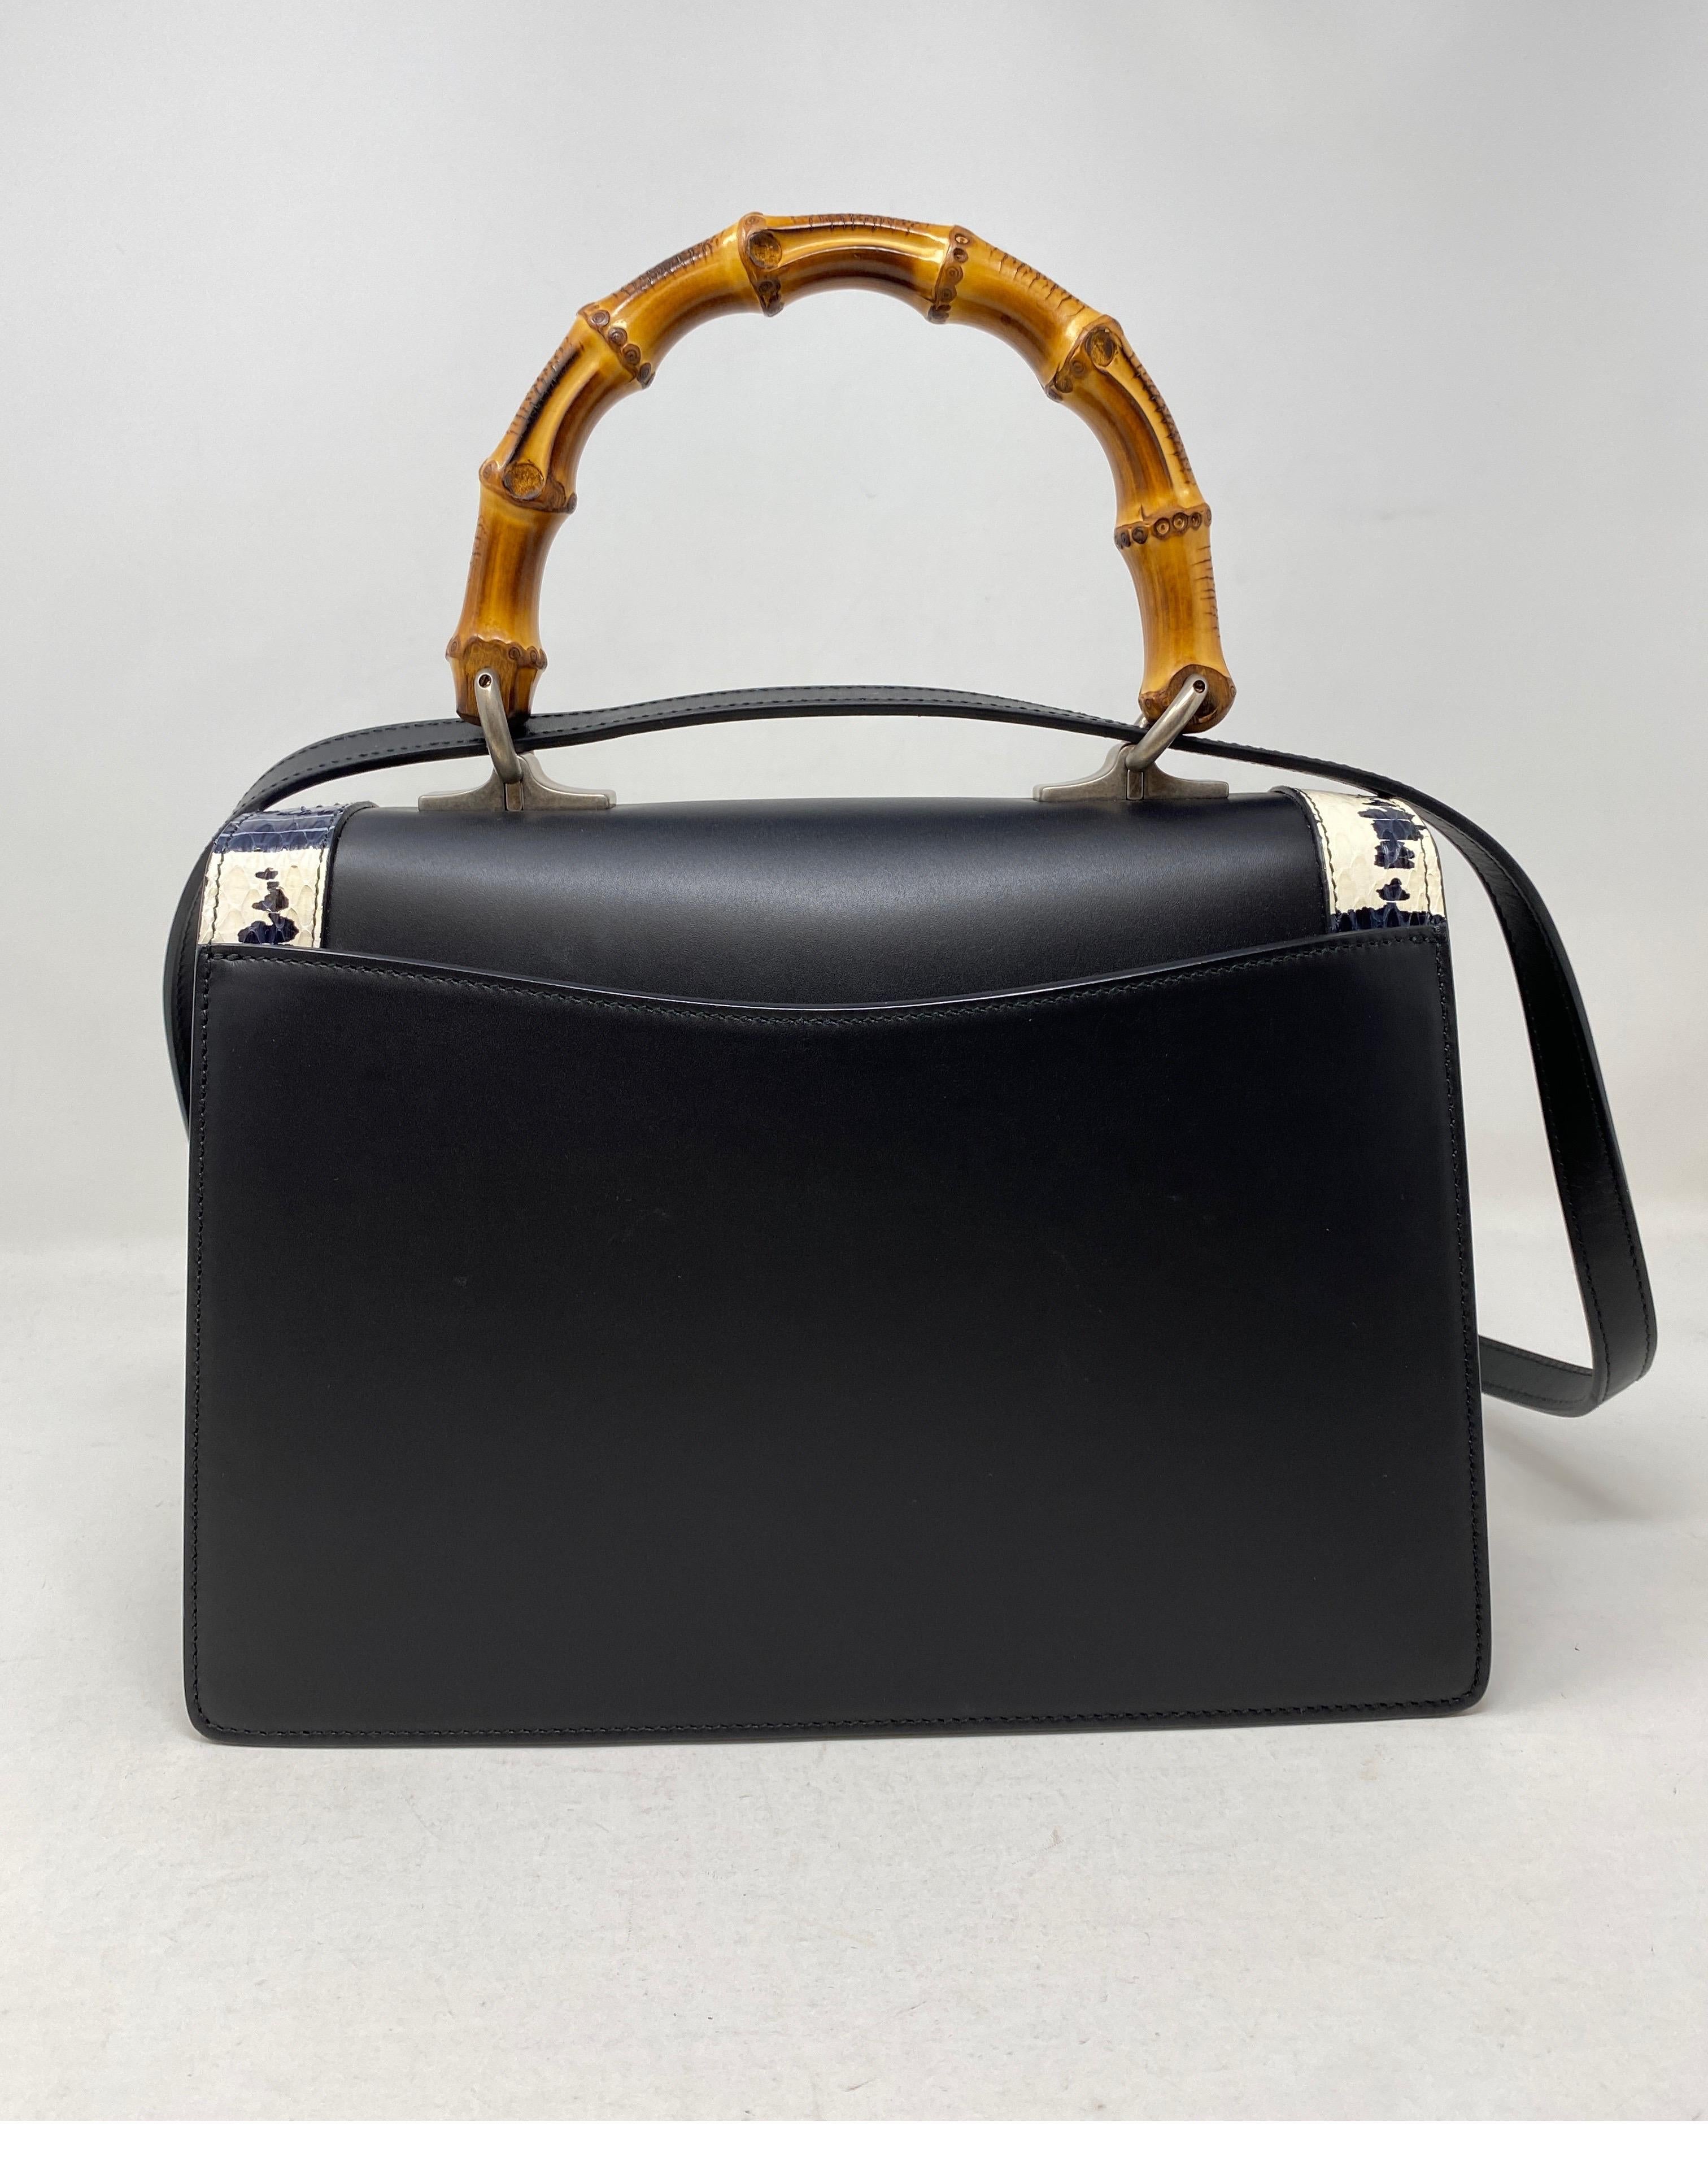 Black leather Gucci with wooden bamboo top handle. Also comes with removable adjustable leather strap and black ribbon bow strap. Metal snack head detail with stone detail and snake skin rim on flap. Silver varnished hardware detail. Excellent